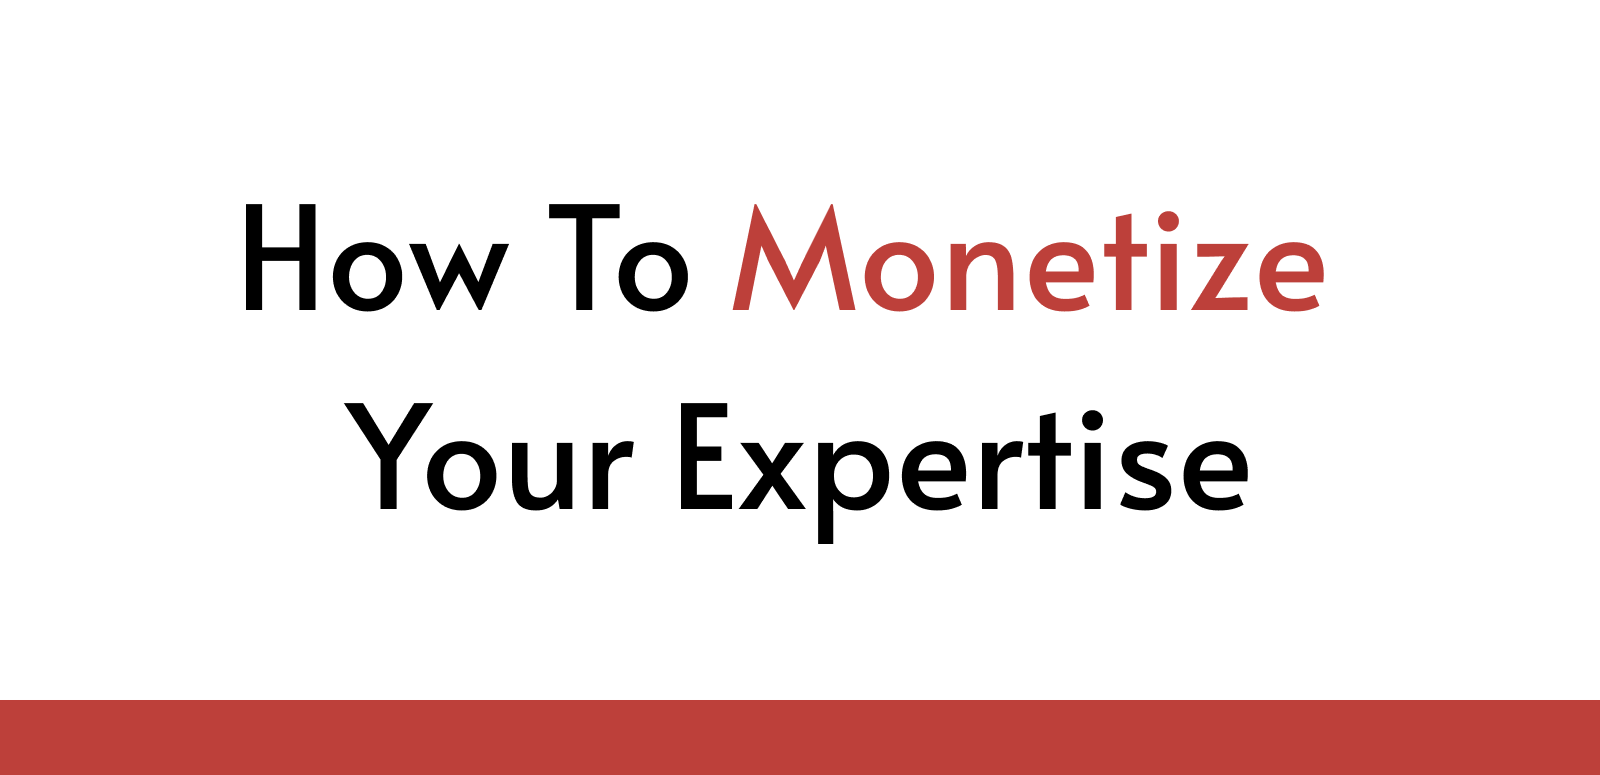 How To Monetize Your Expertise